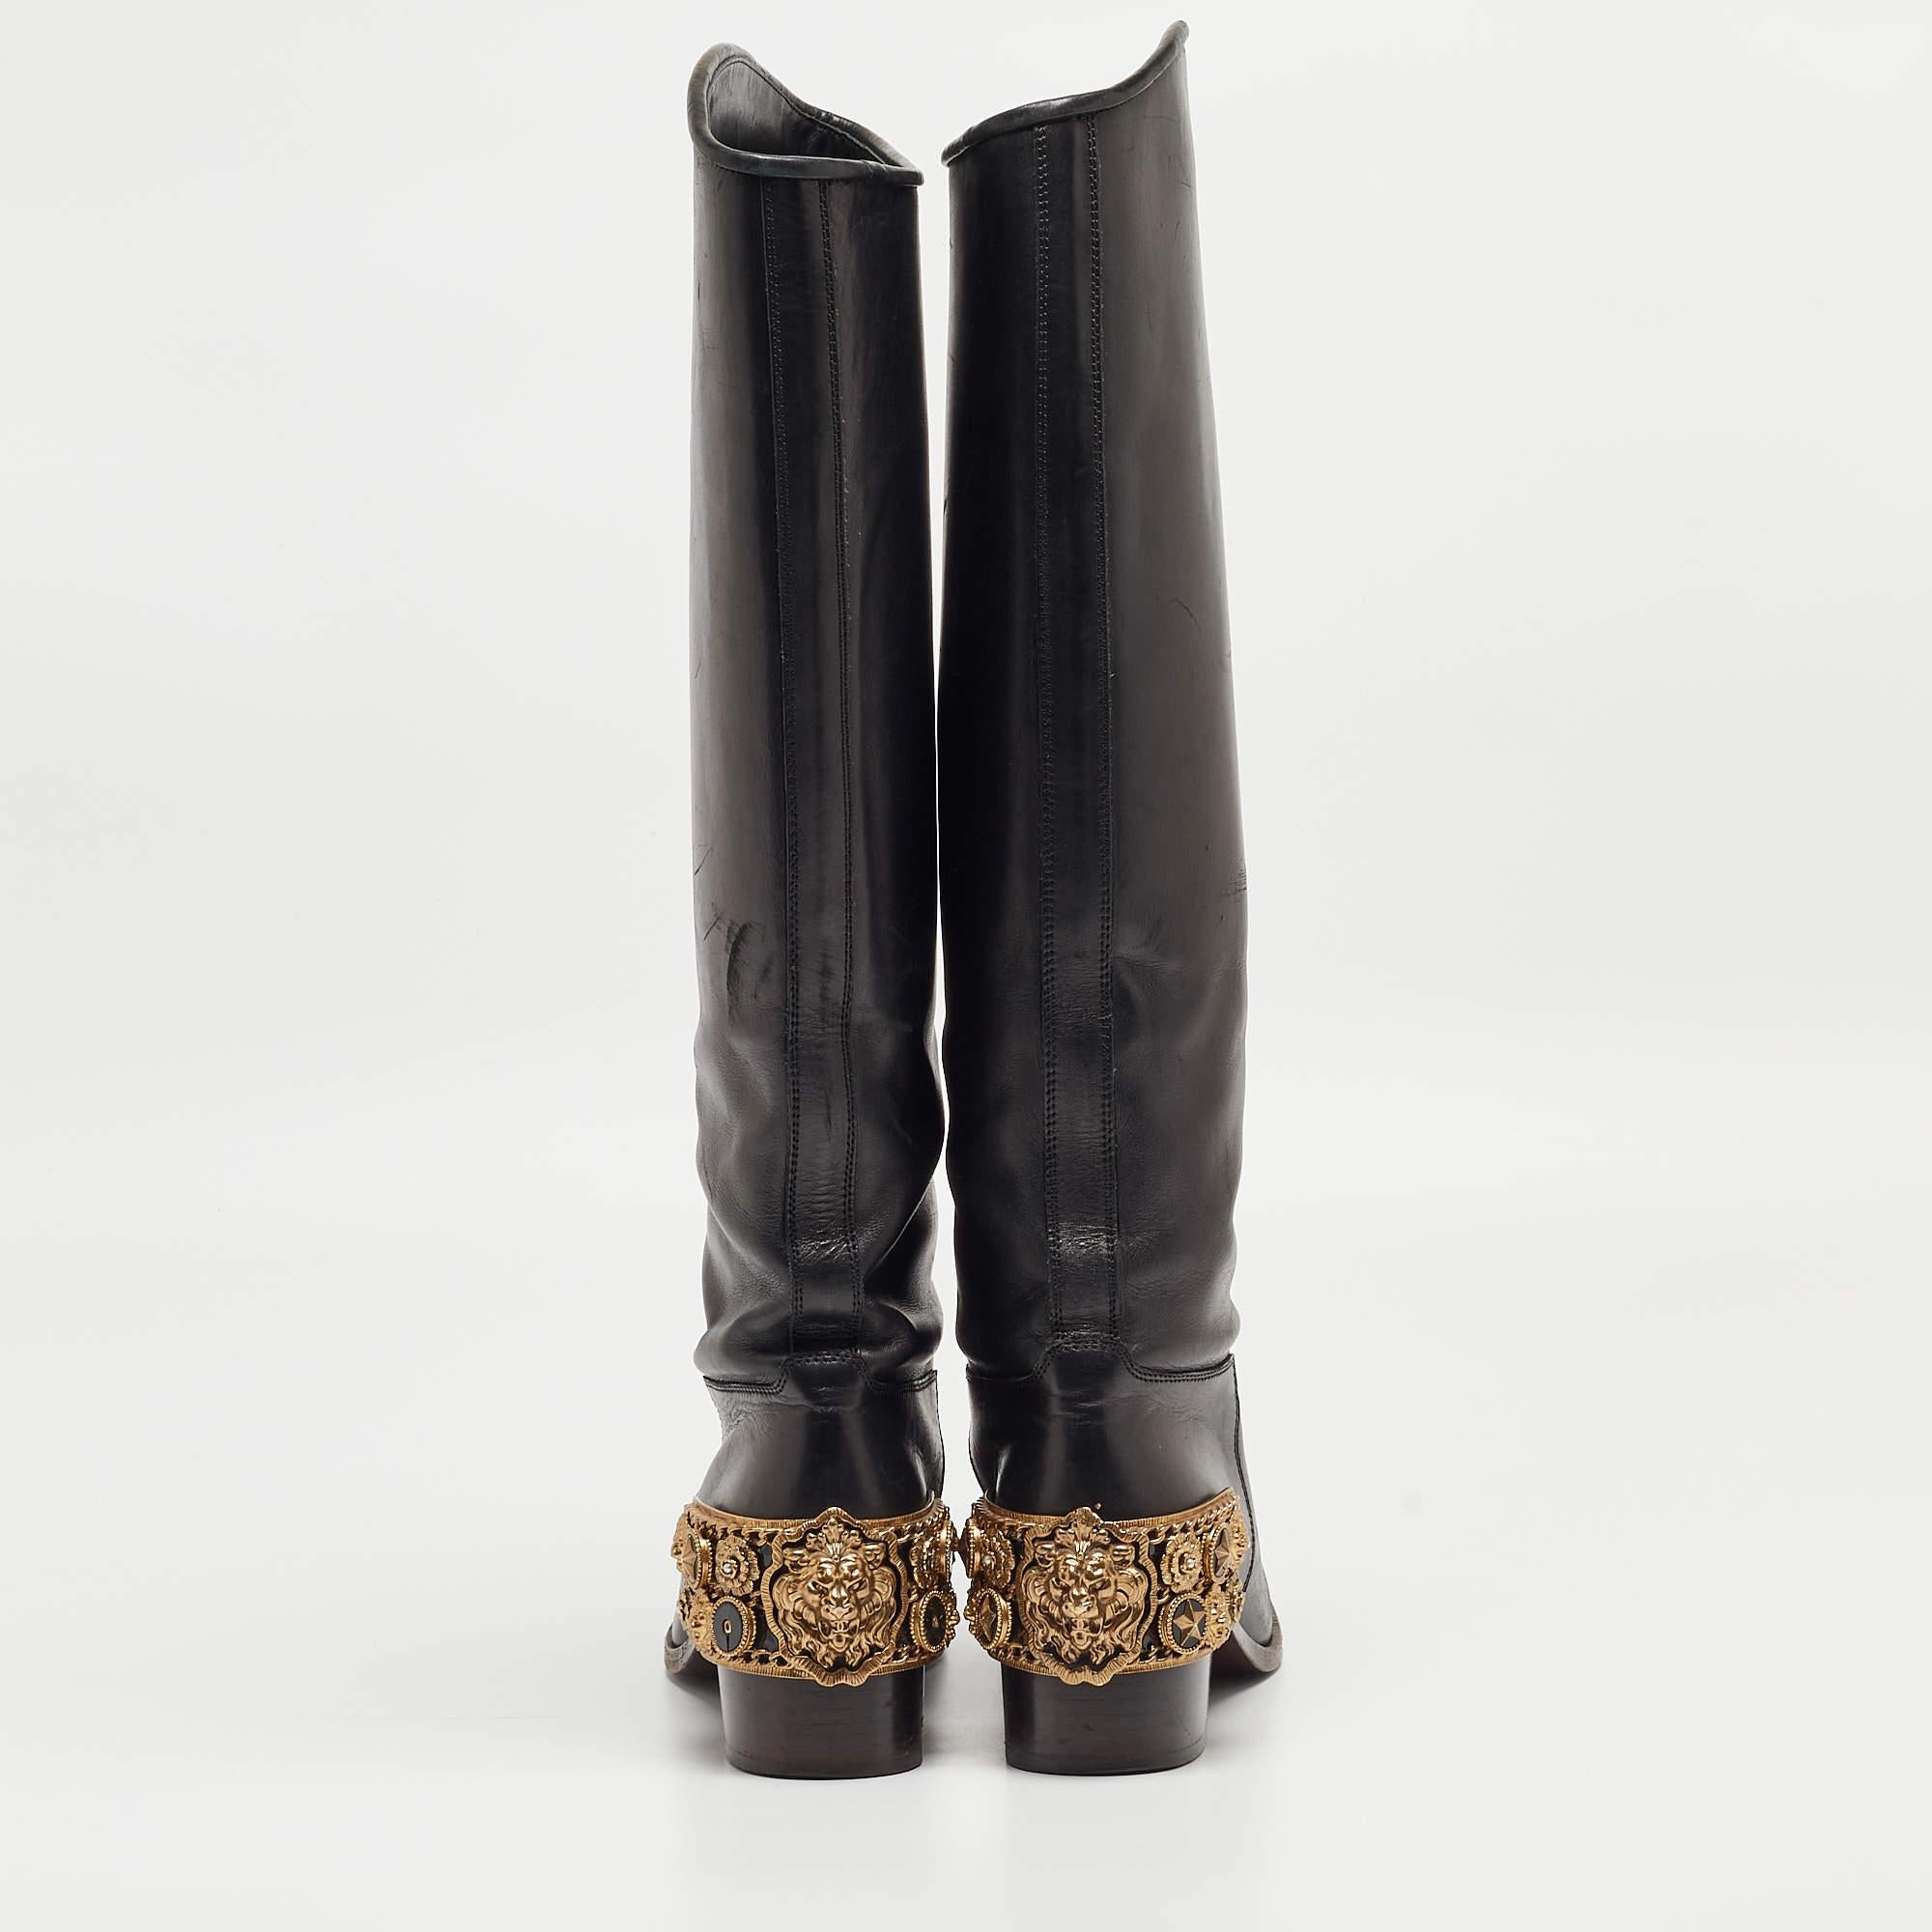 Chanel Black Leather Lion Heel Detail Riding Boots Size 39.5 3